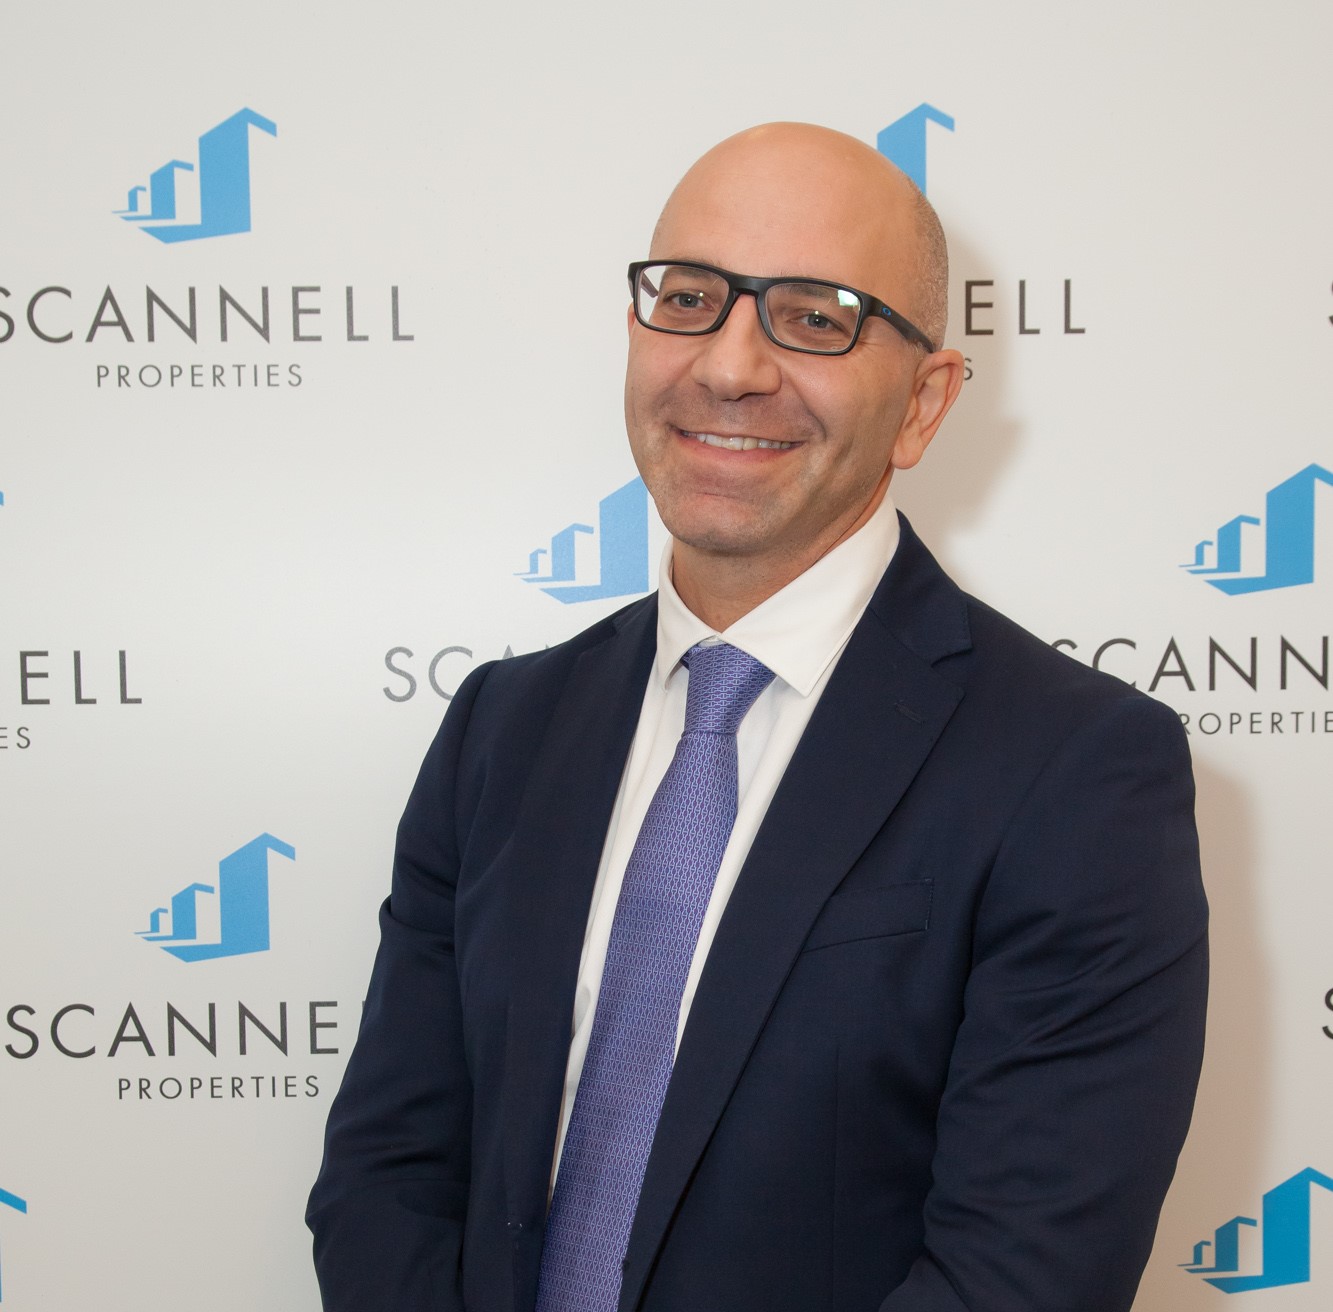 Scannell Properties promotes Ivan Poletti to Head of Construction, Italy